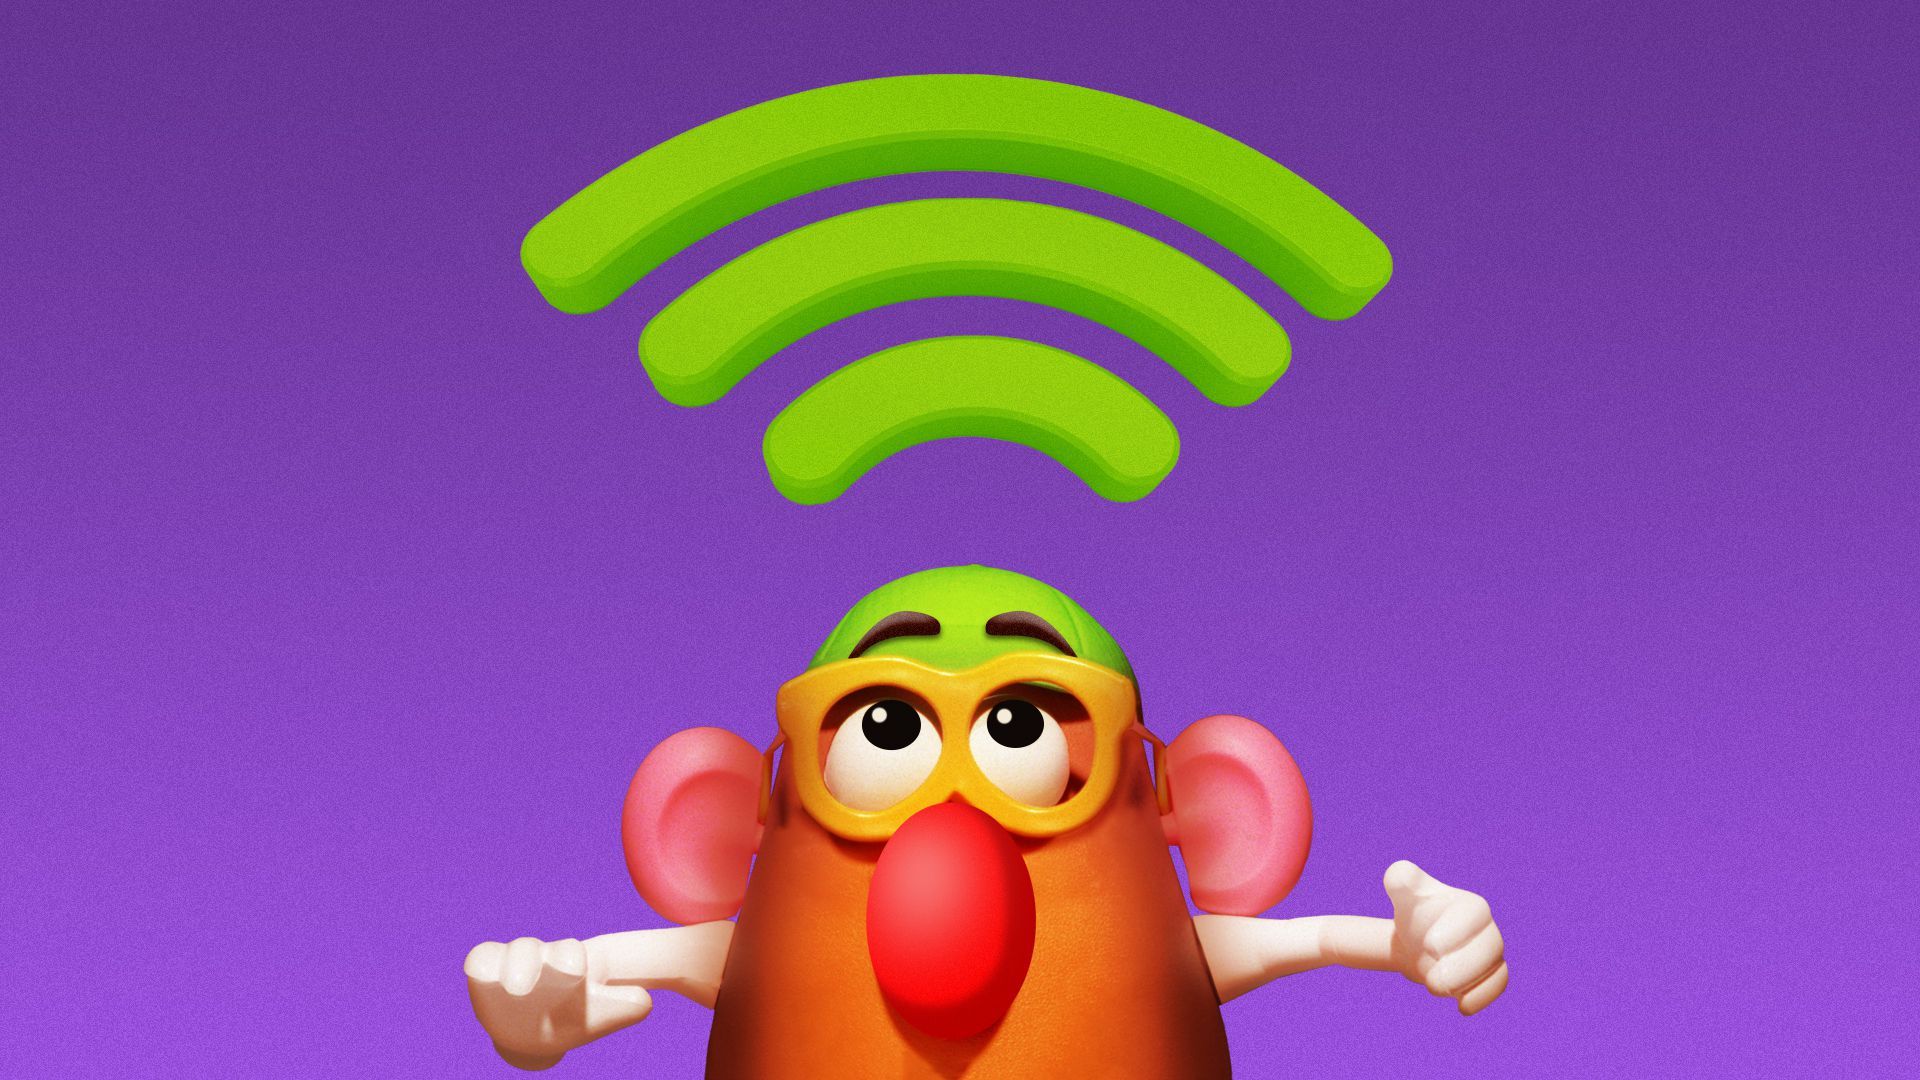 Illustration of a Mr. Potato Head doll with a wifi symbol over his head